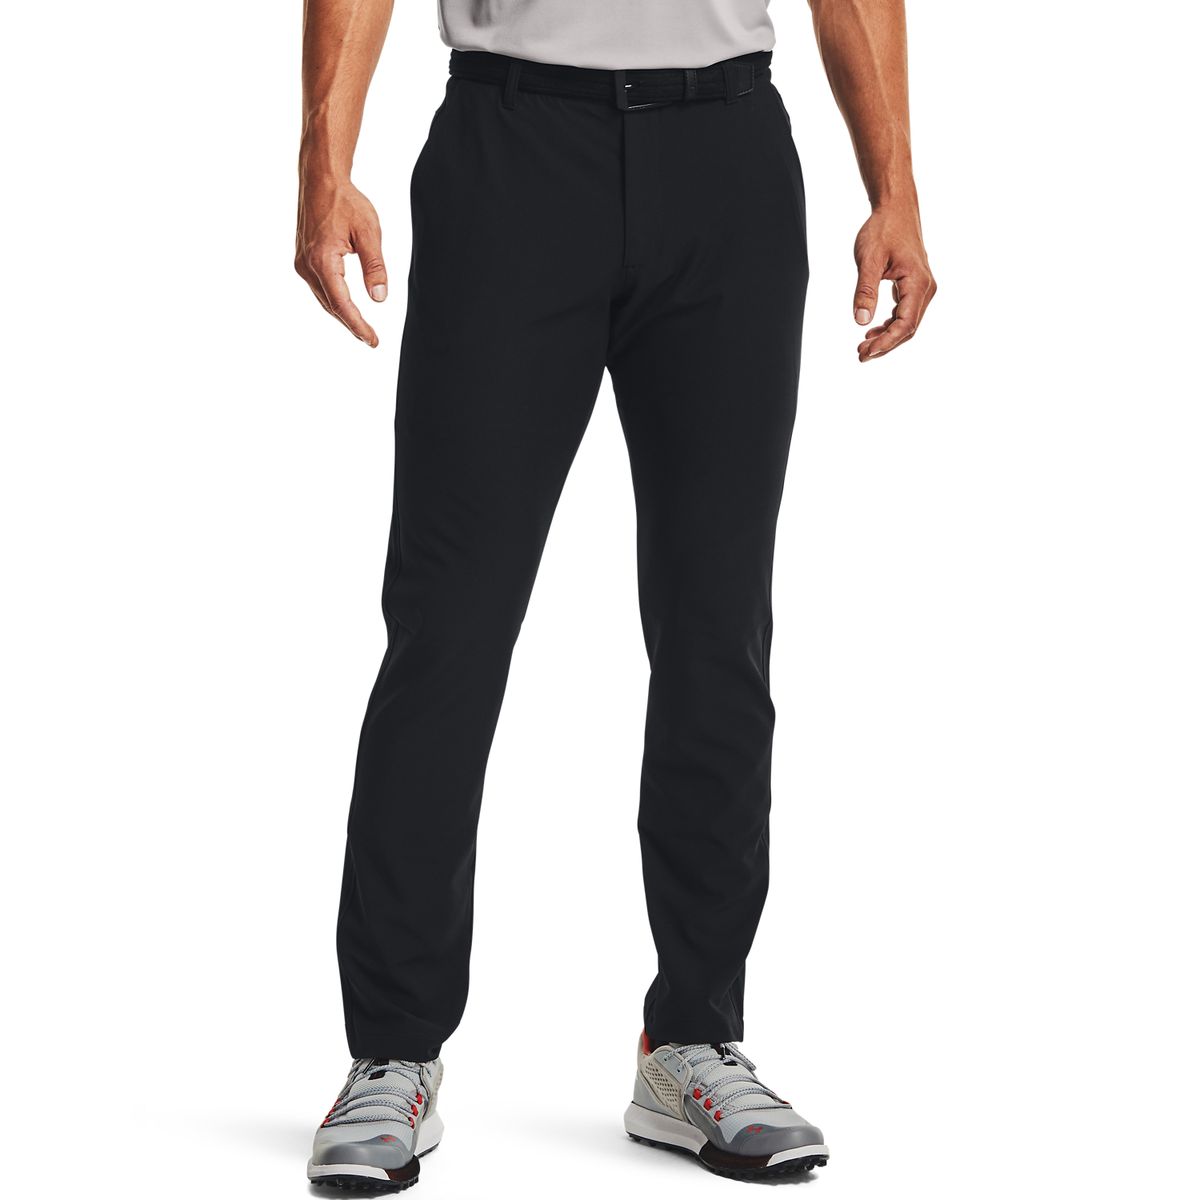 Under Armour Men's UA Drive Tapered Golf Pants - Black/Halo Gray | Shop ...